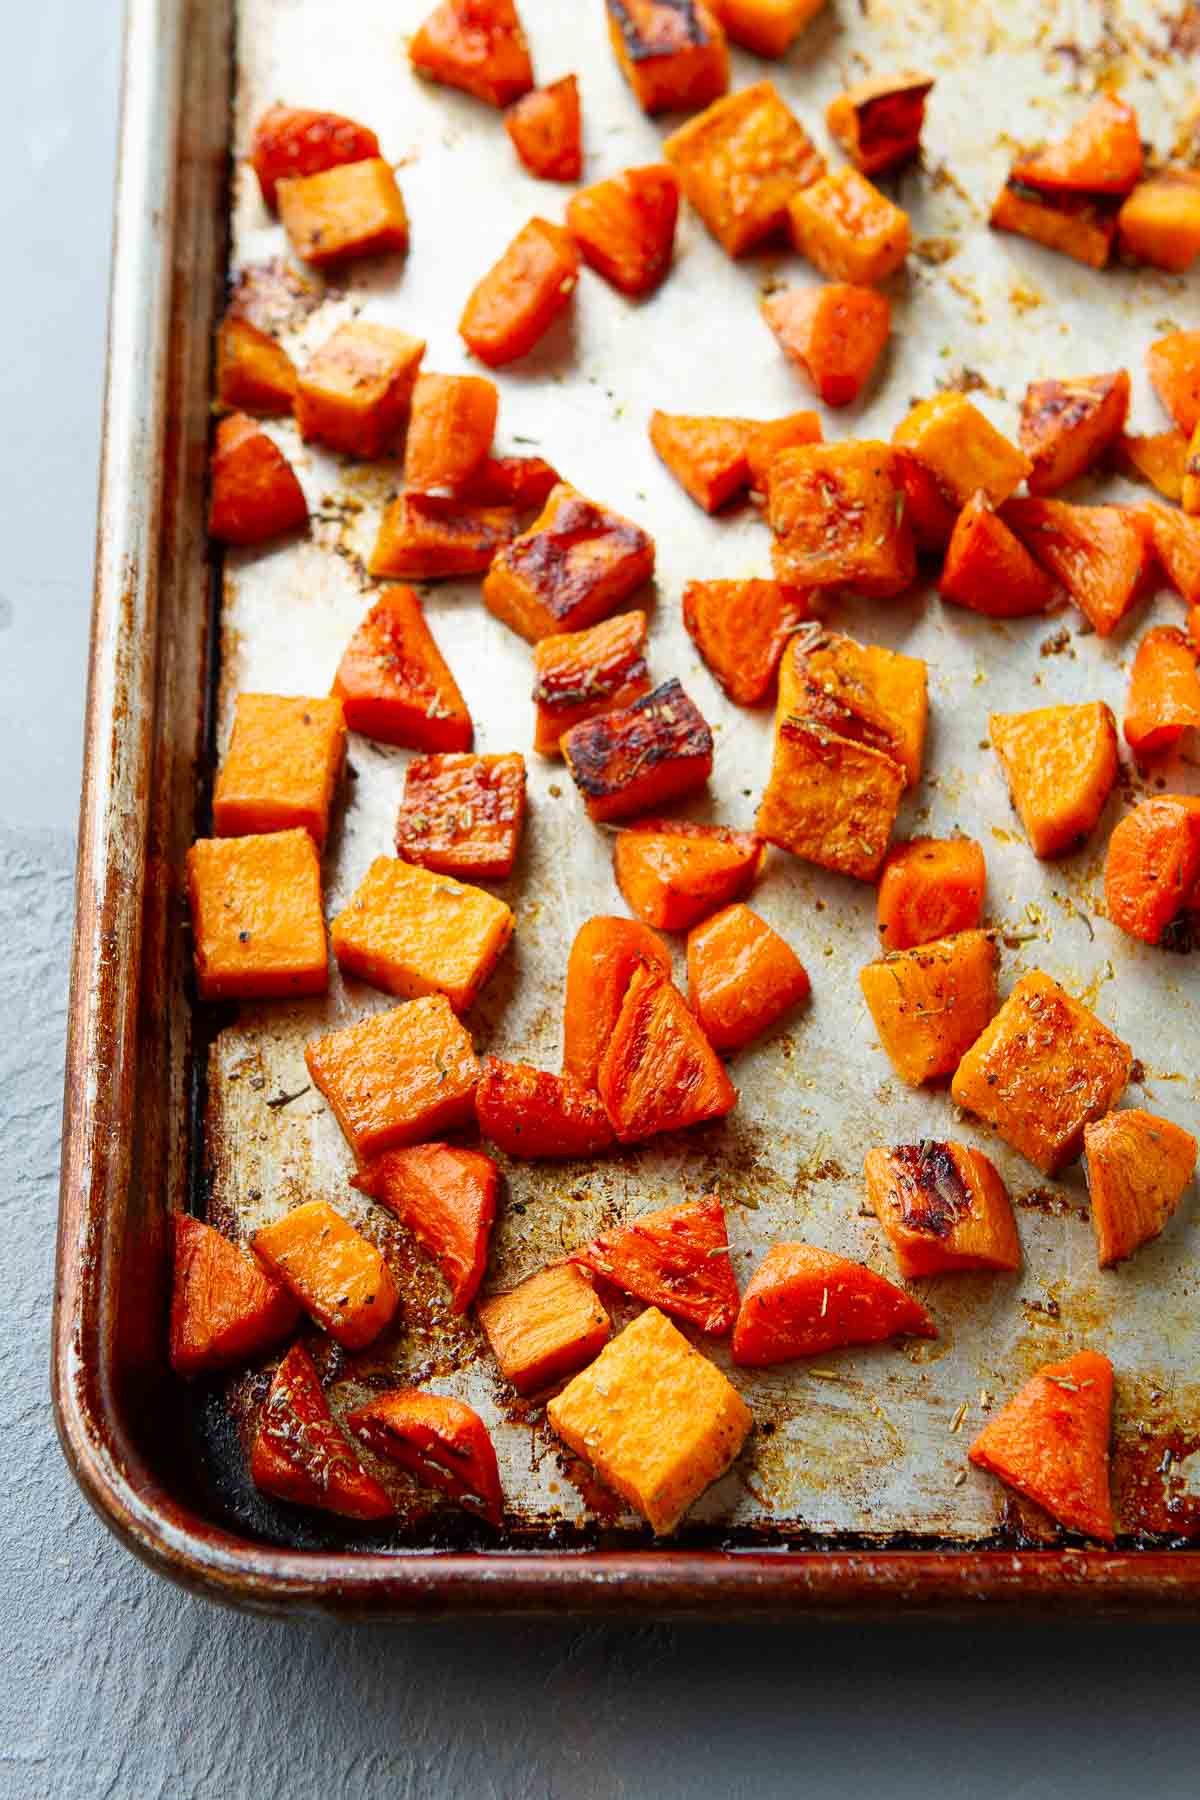 Roasted carrots and sweet potatoes on a baking sheet.